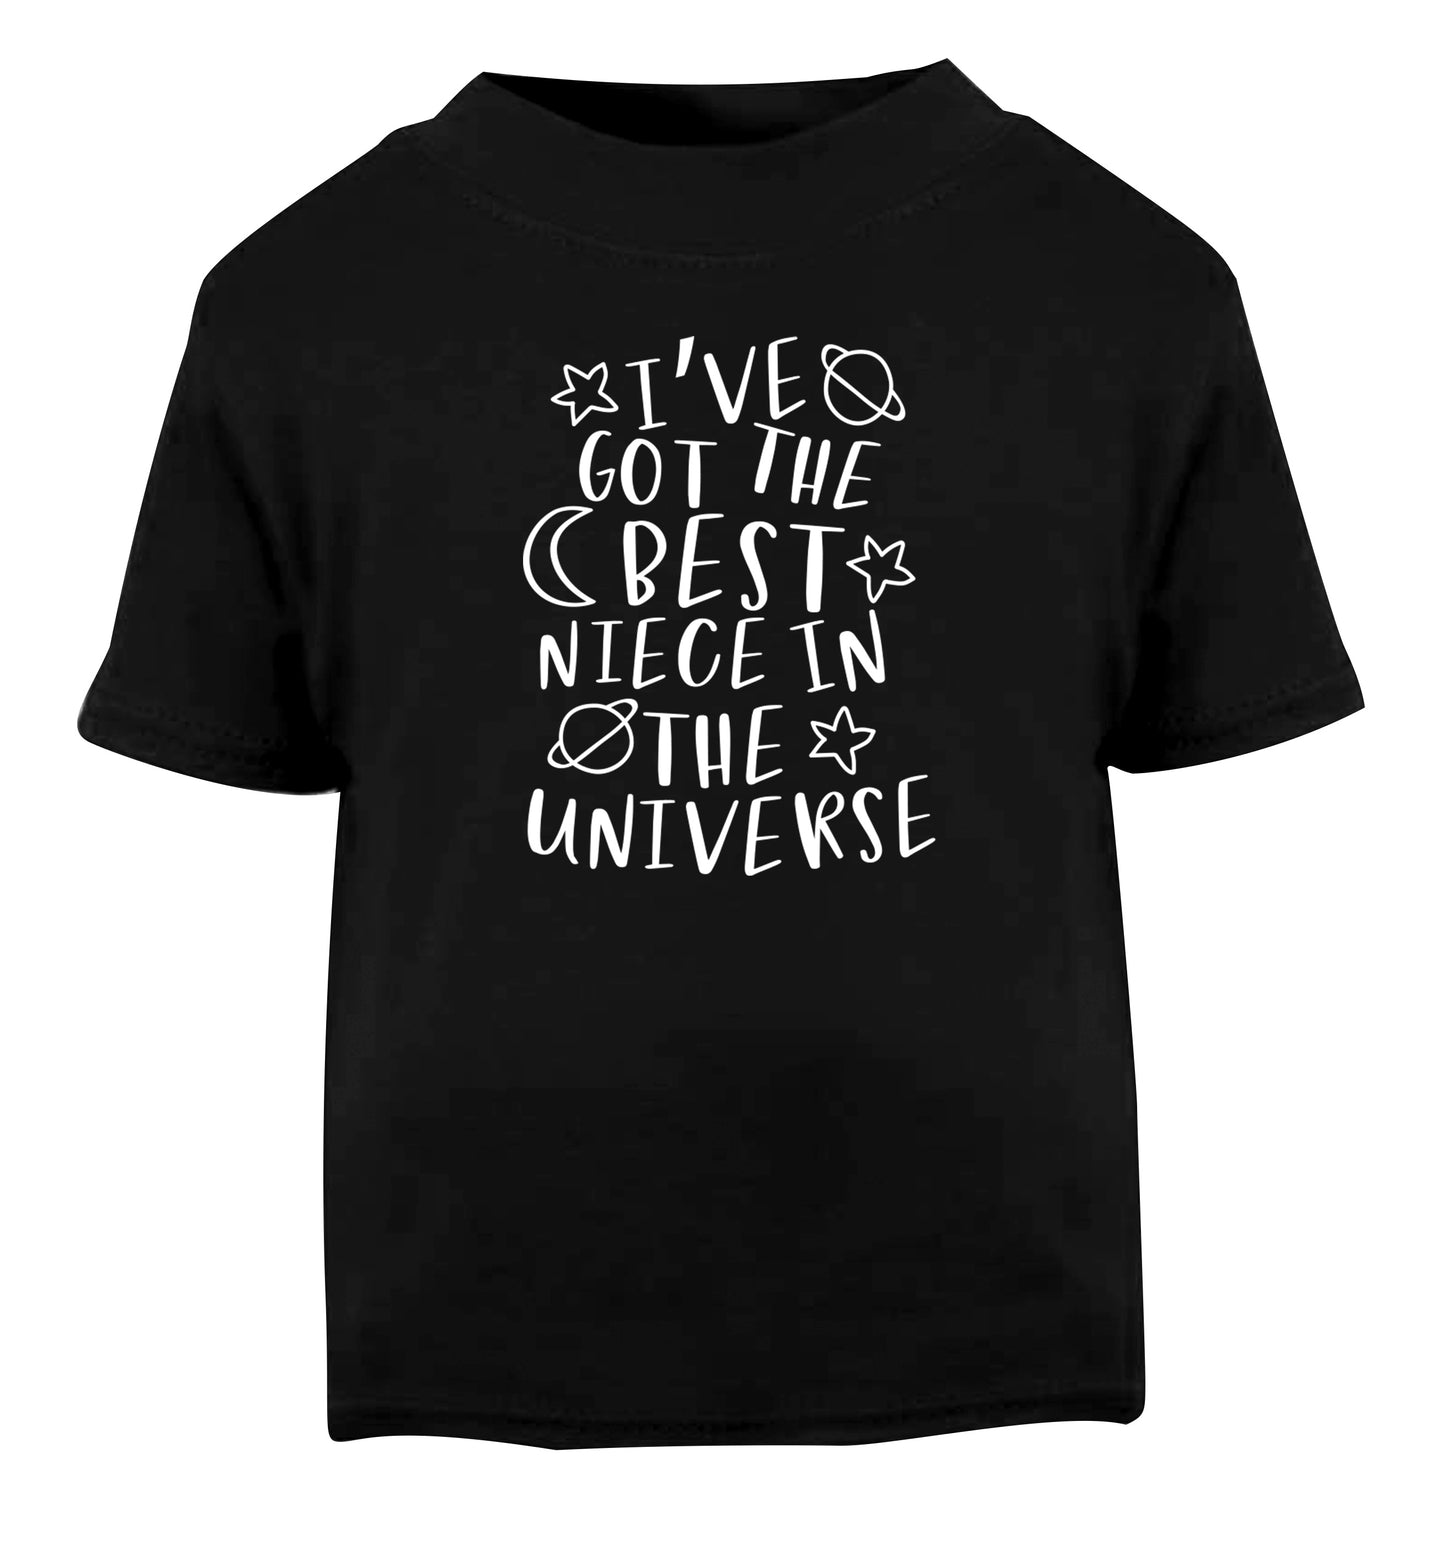 I've got the best niece in the universe Black Baby Toddler Tshirt 2 years